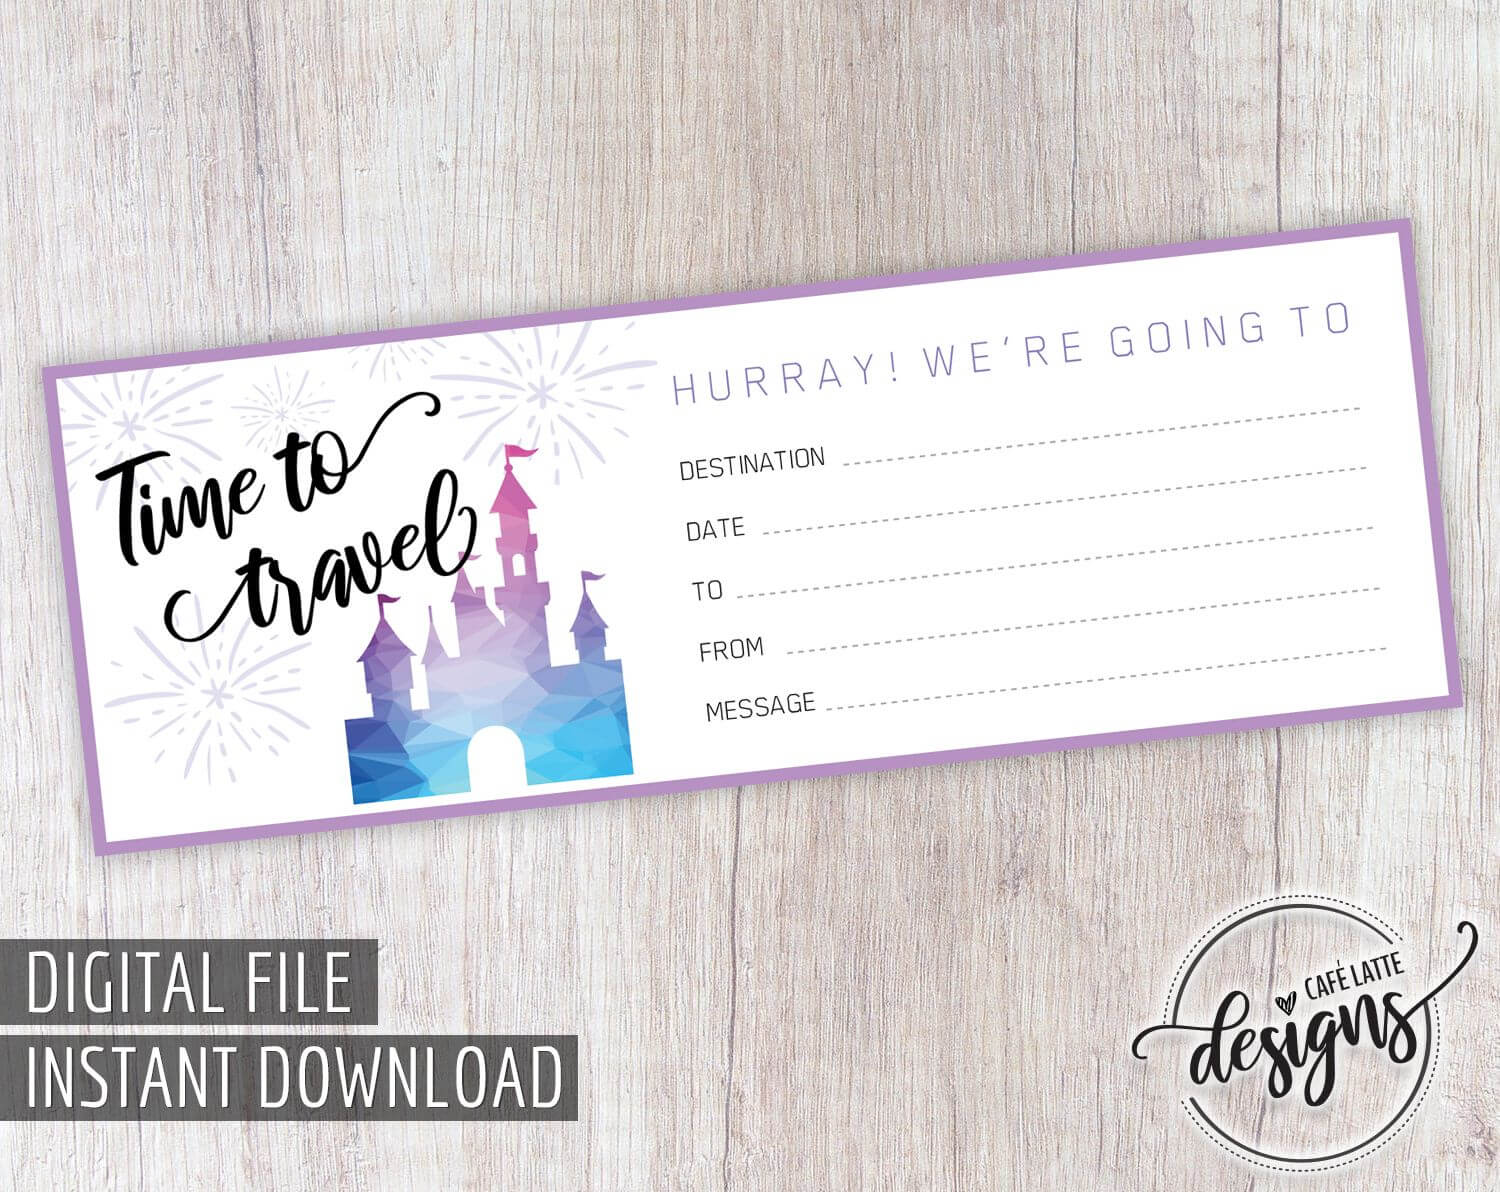 012 Travel Gift Certificate Template Stirring Ideas Agency Inside Free Travel Gift Certificate Template